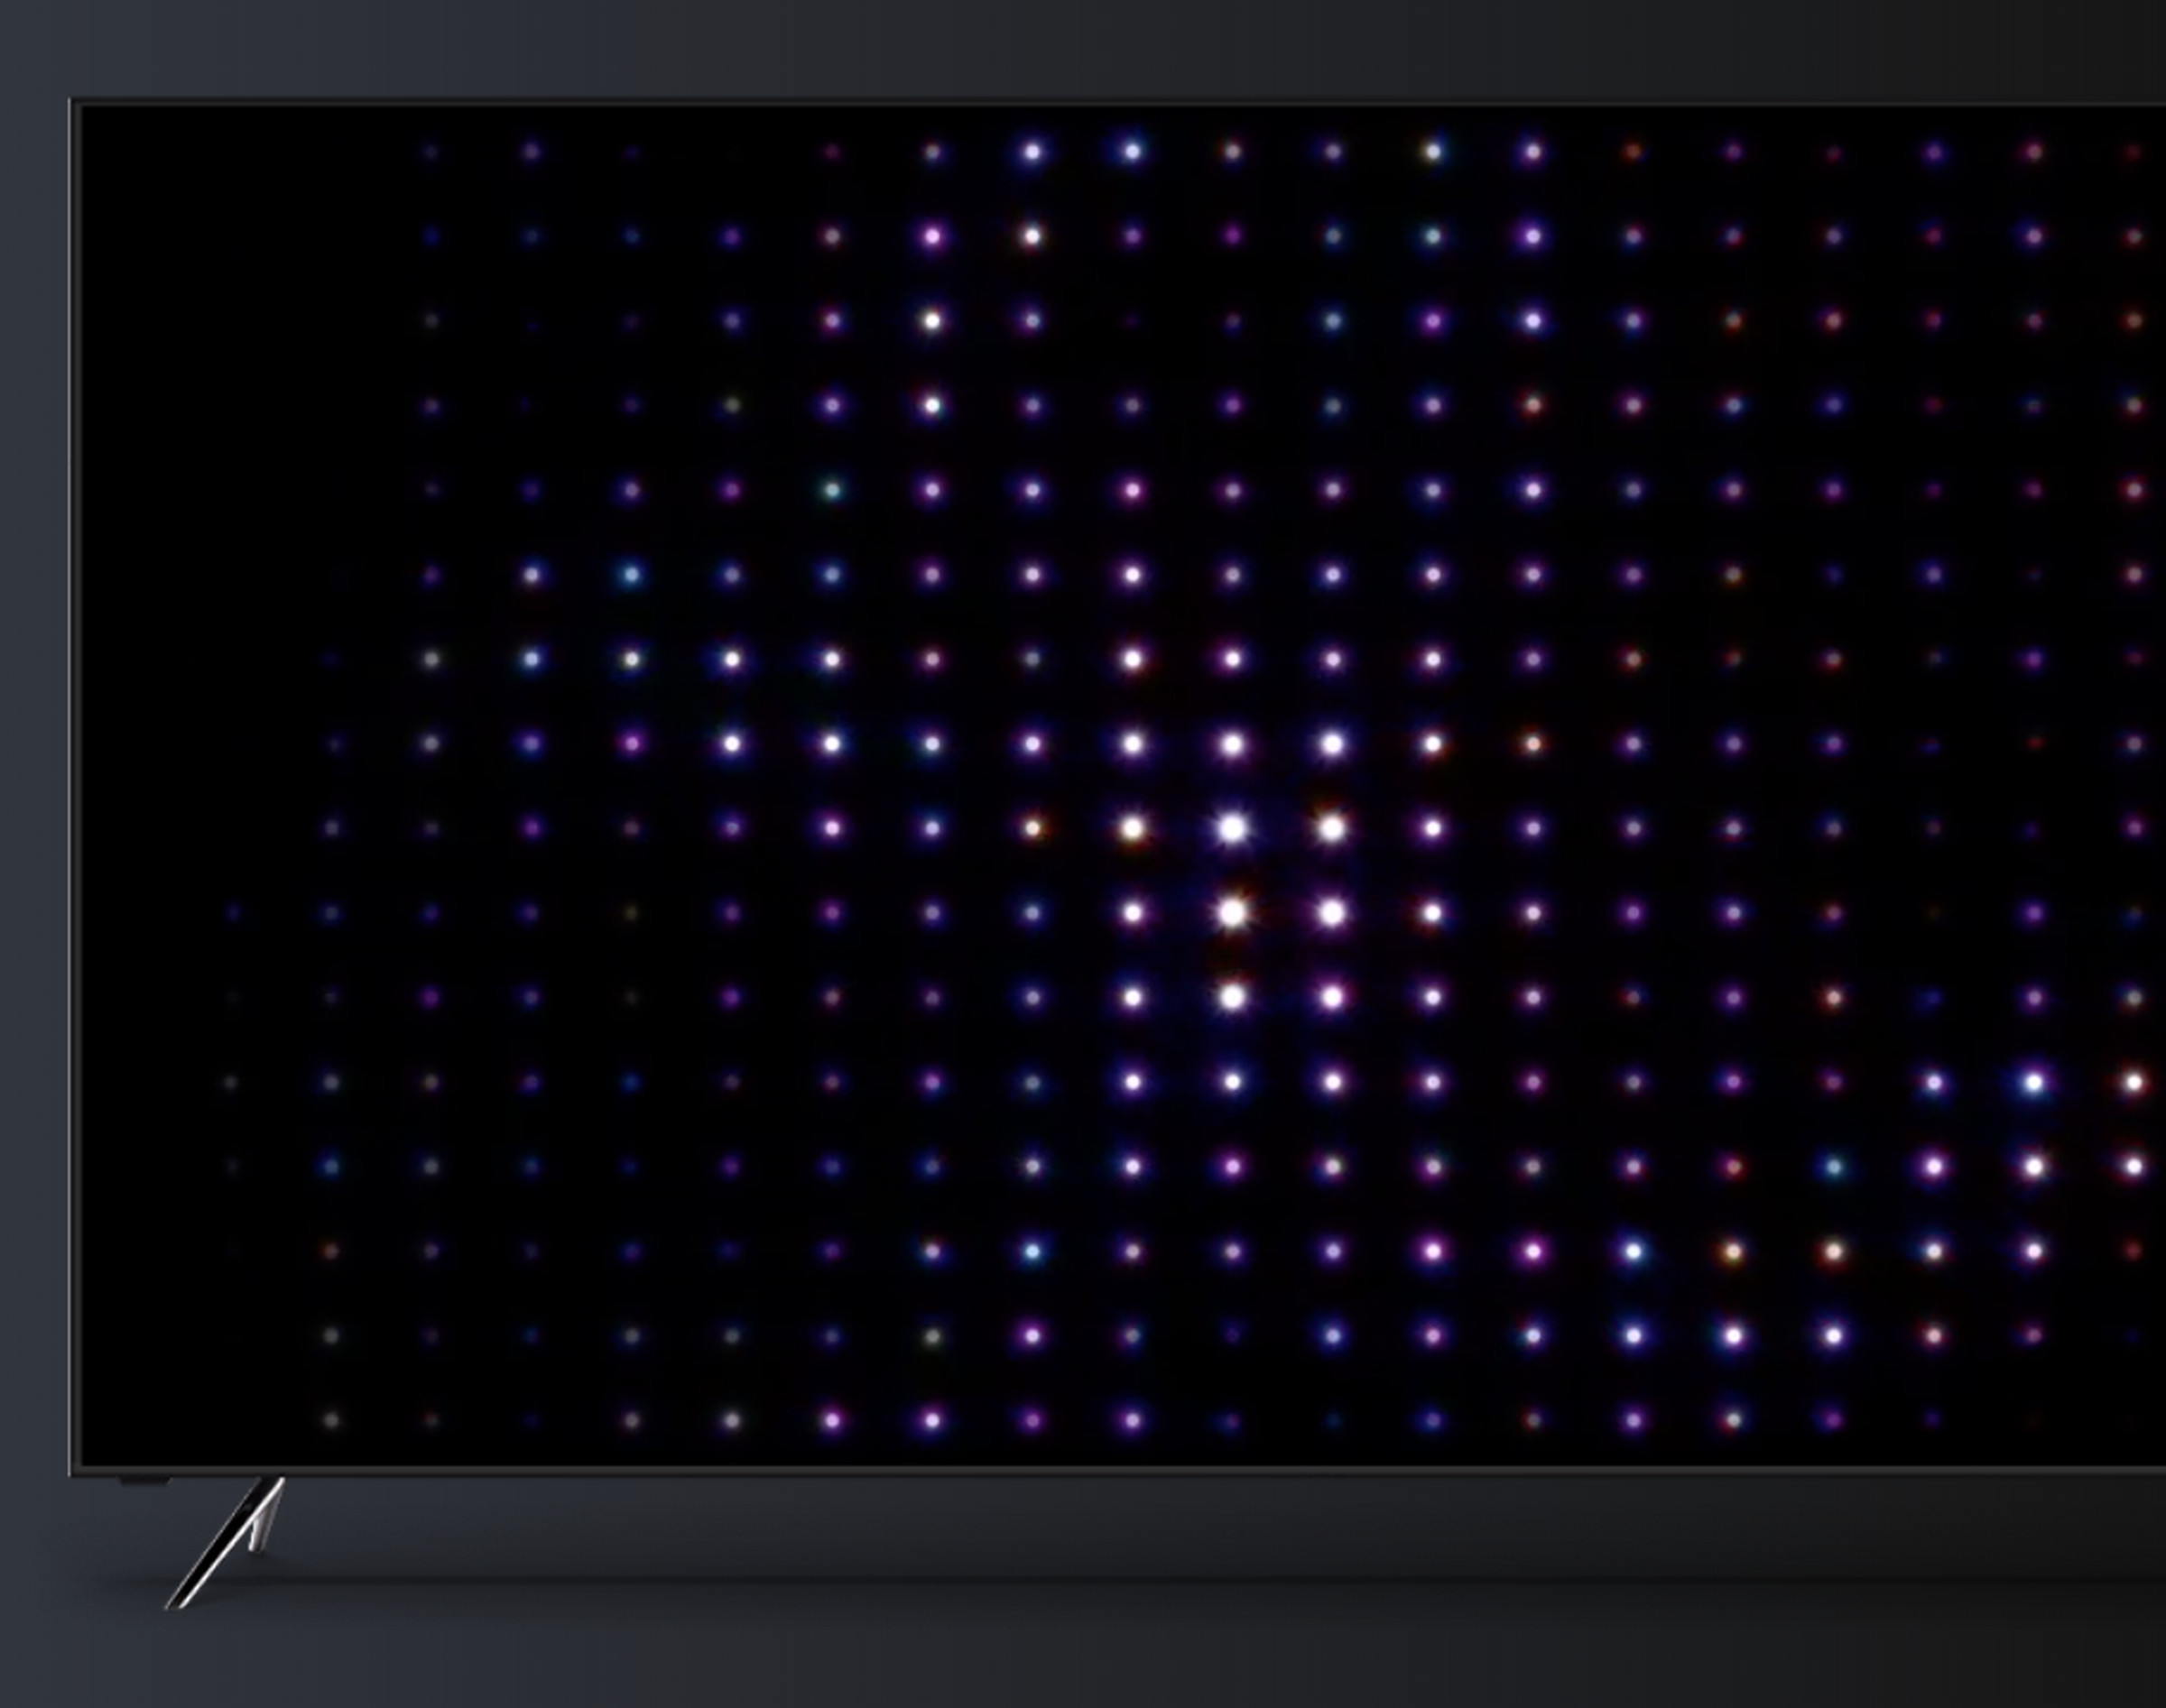 Full-array local dimming allows the TV to control very specific areas of its backlight to maximize contrast and brightness on one part of the screen while preserve black levels and shadows on another. 